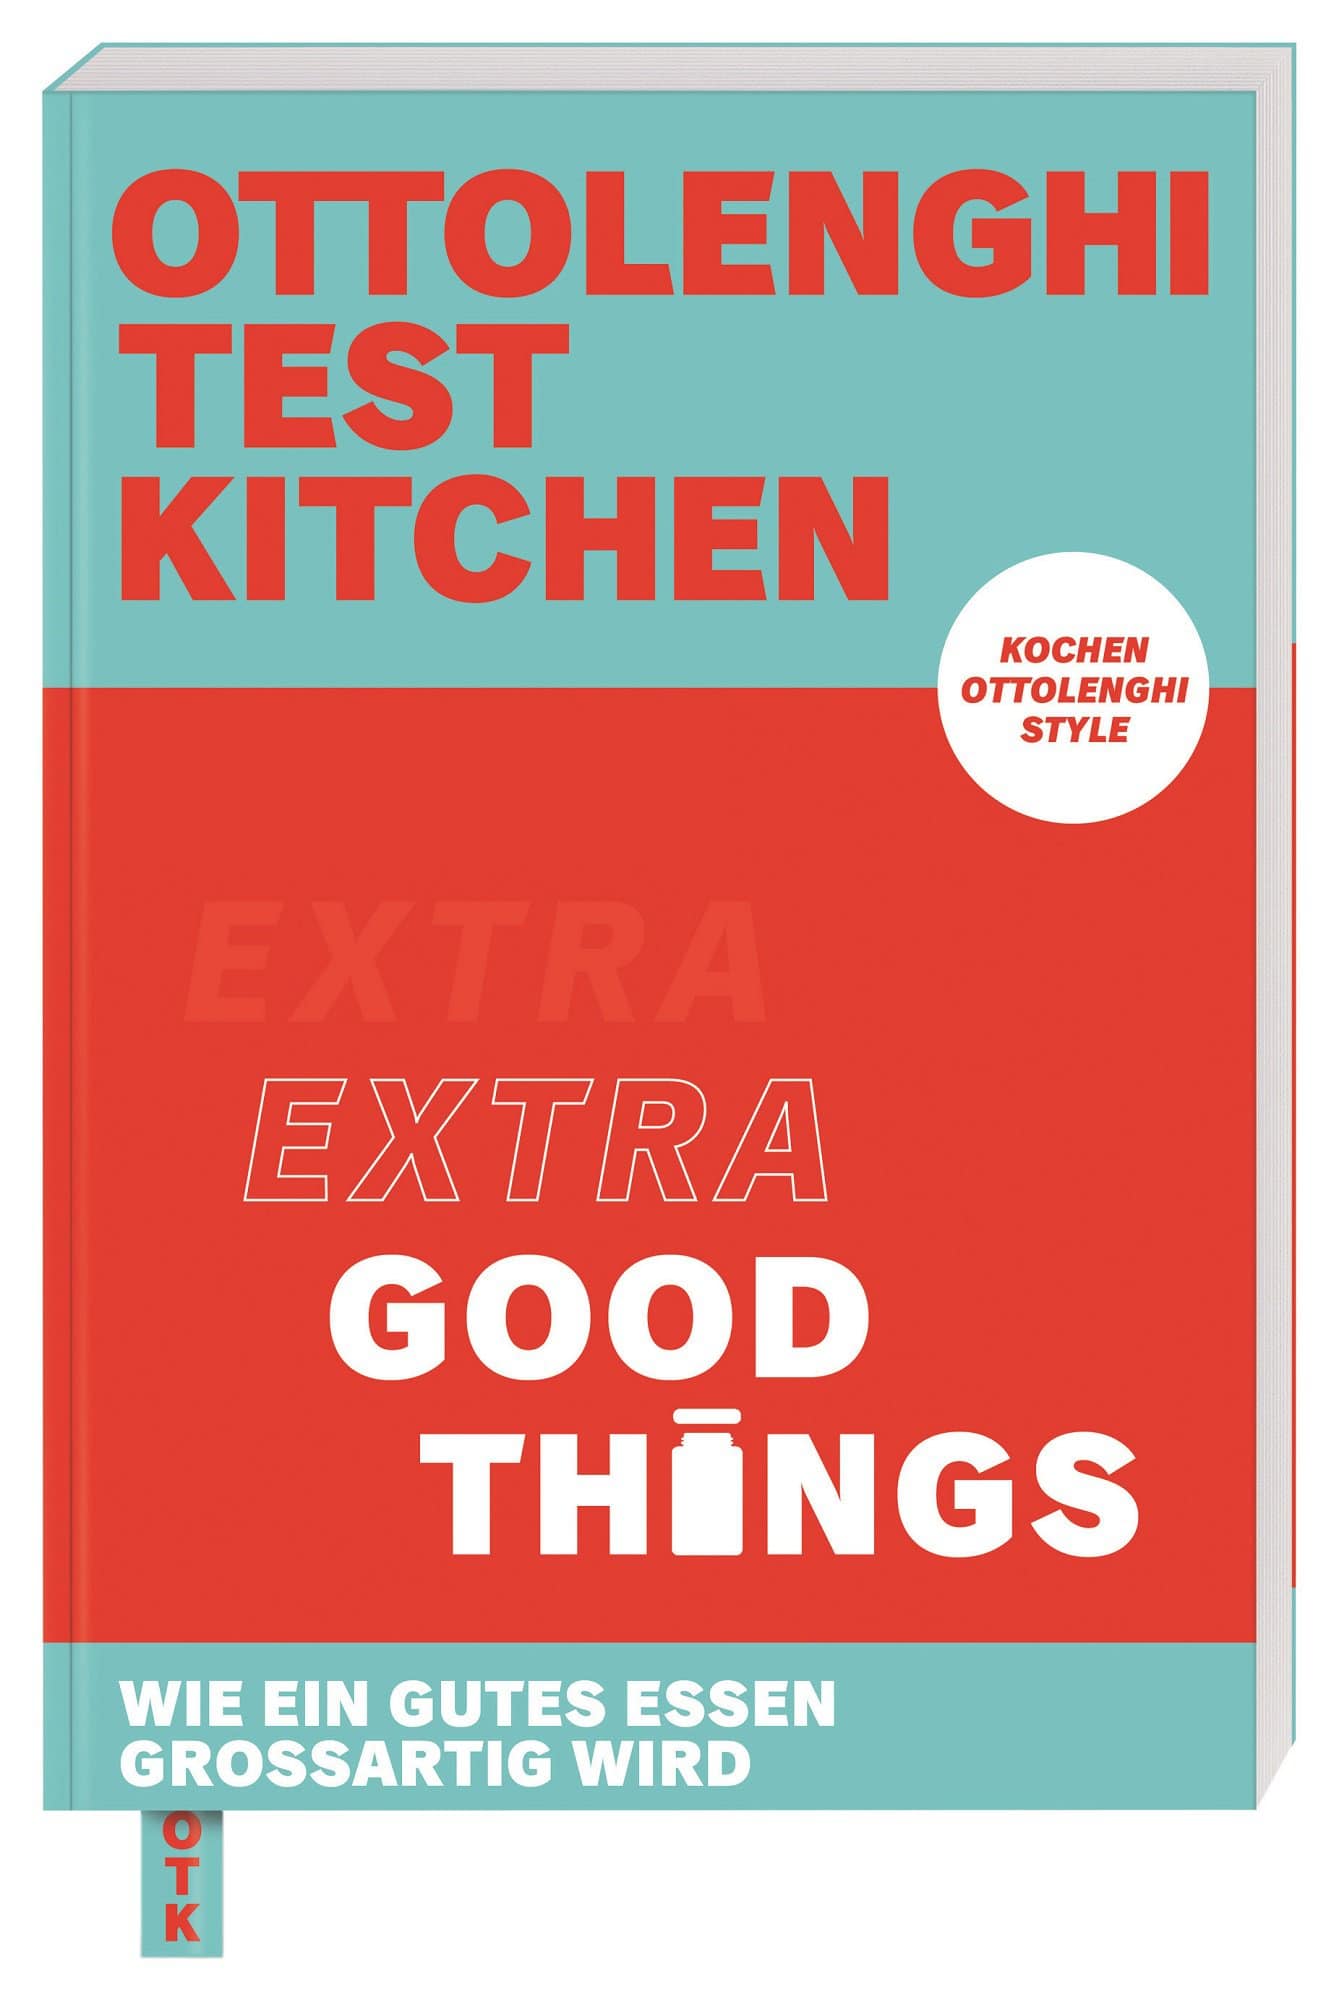 Buchcover "Ottolenghi Test Kitchen: Extra Good Things"